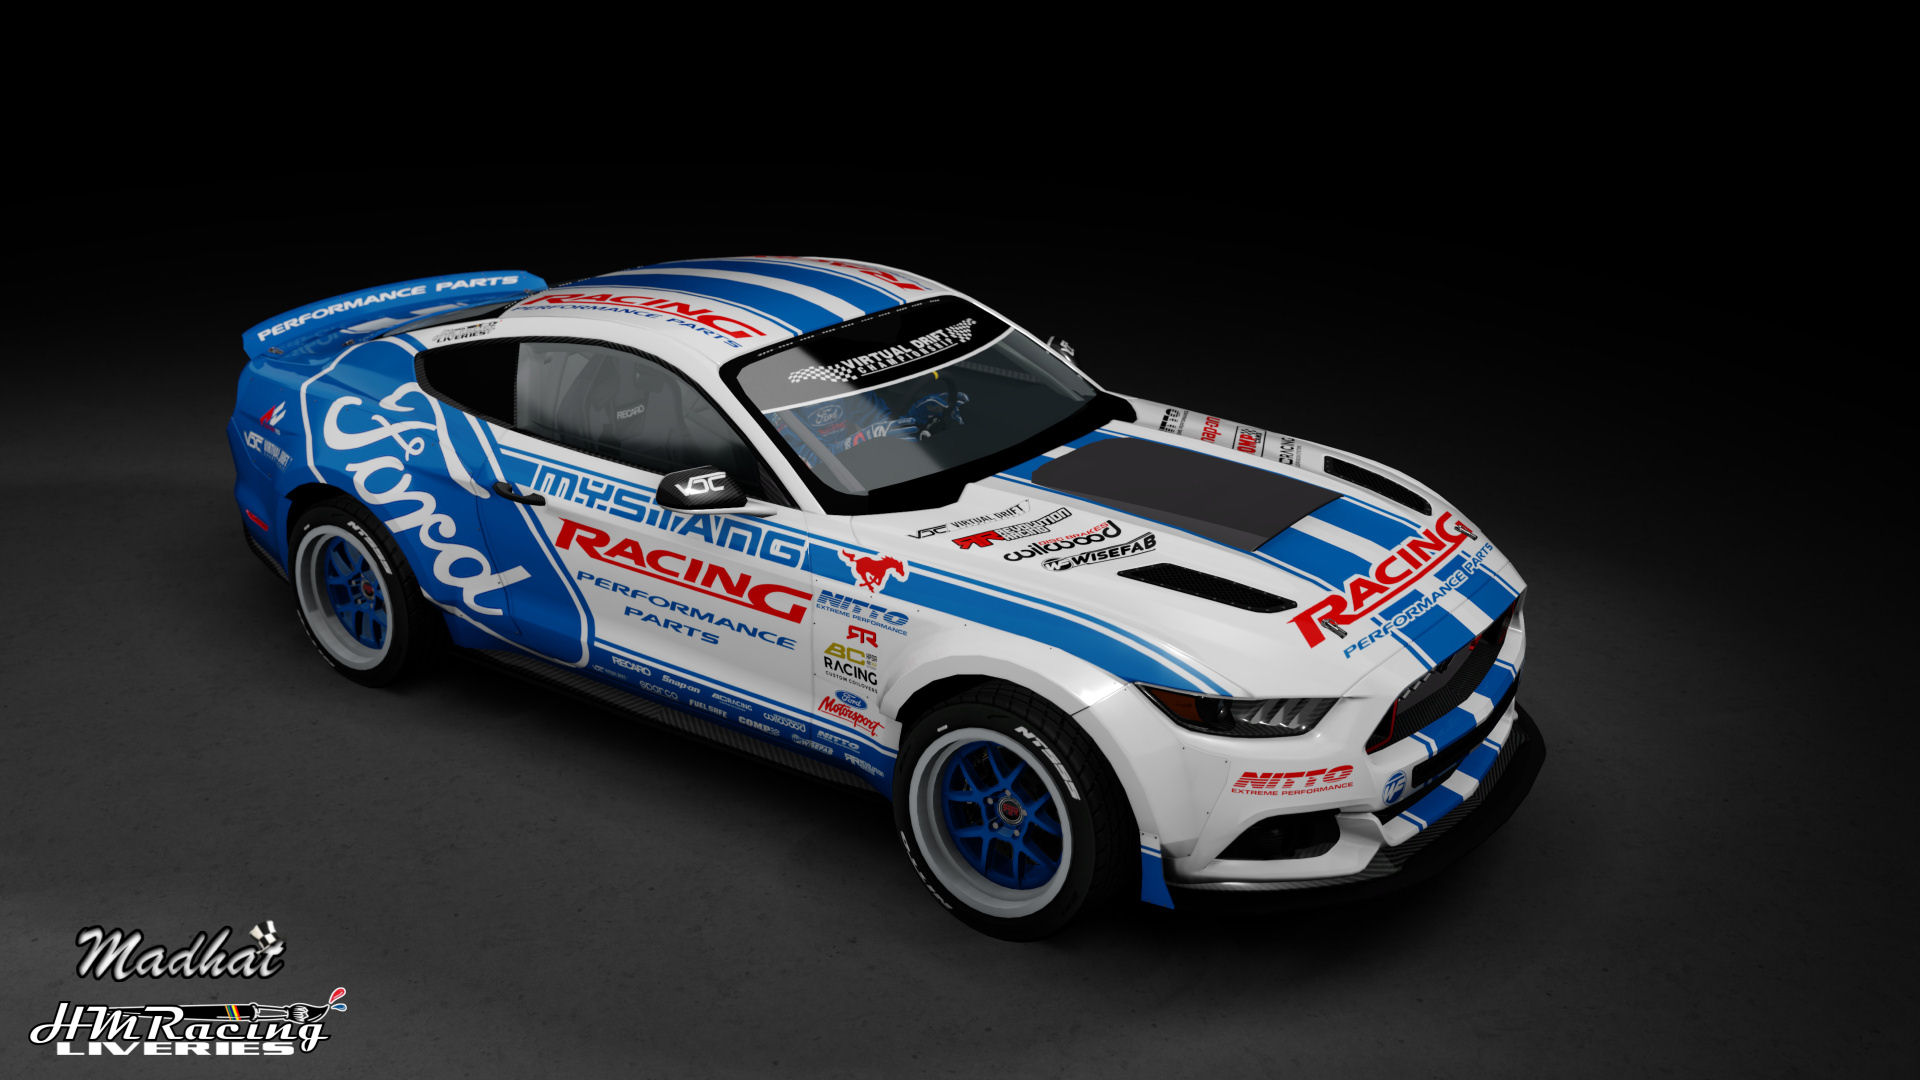 Ford Racing Performance Parts VDC RTR Mustang Madhat HMRacing Liveries 02.jpg